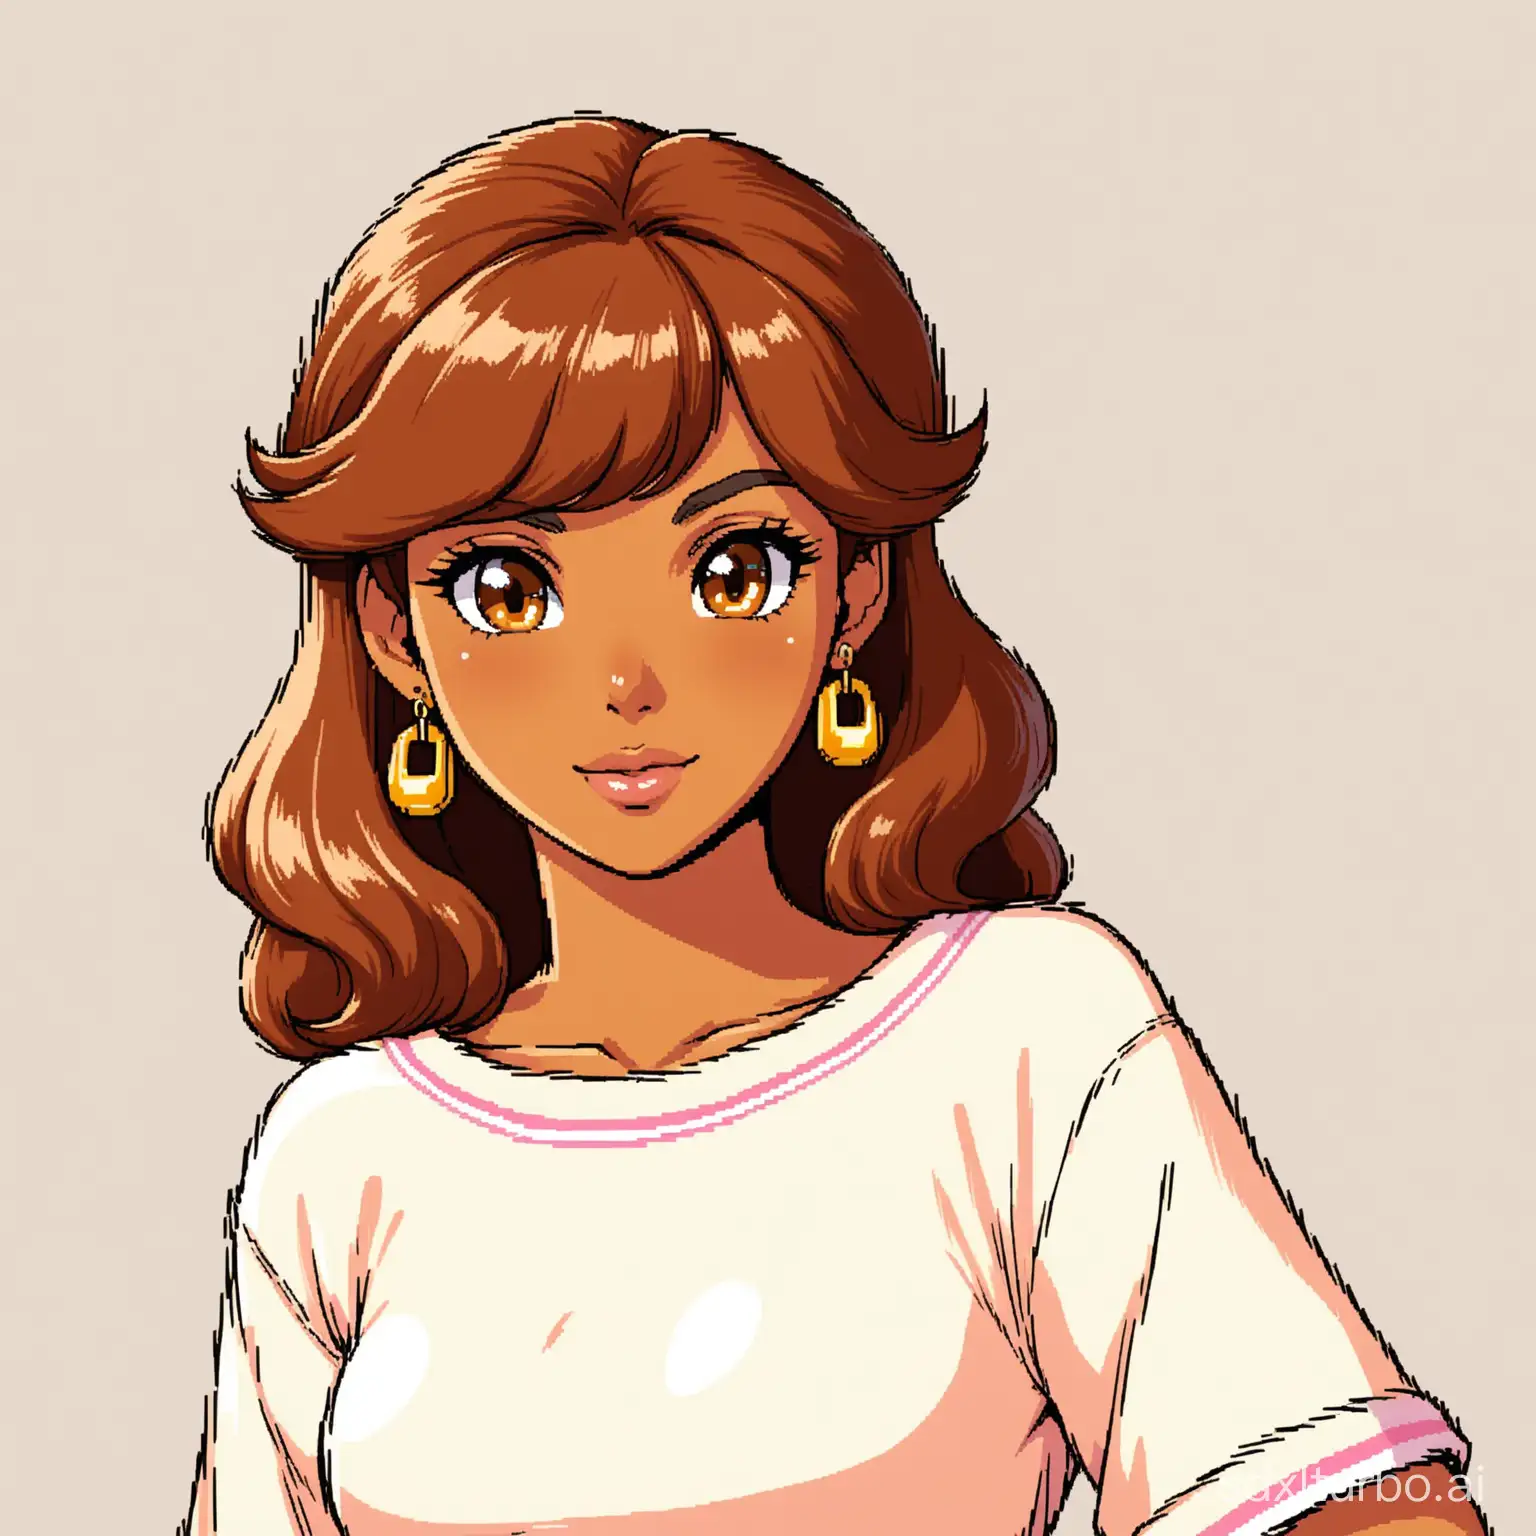 1980s Arcade Game Character. She's a Latina with caramel skin, chestnut hair, and warm brown eyes. White Background.